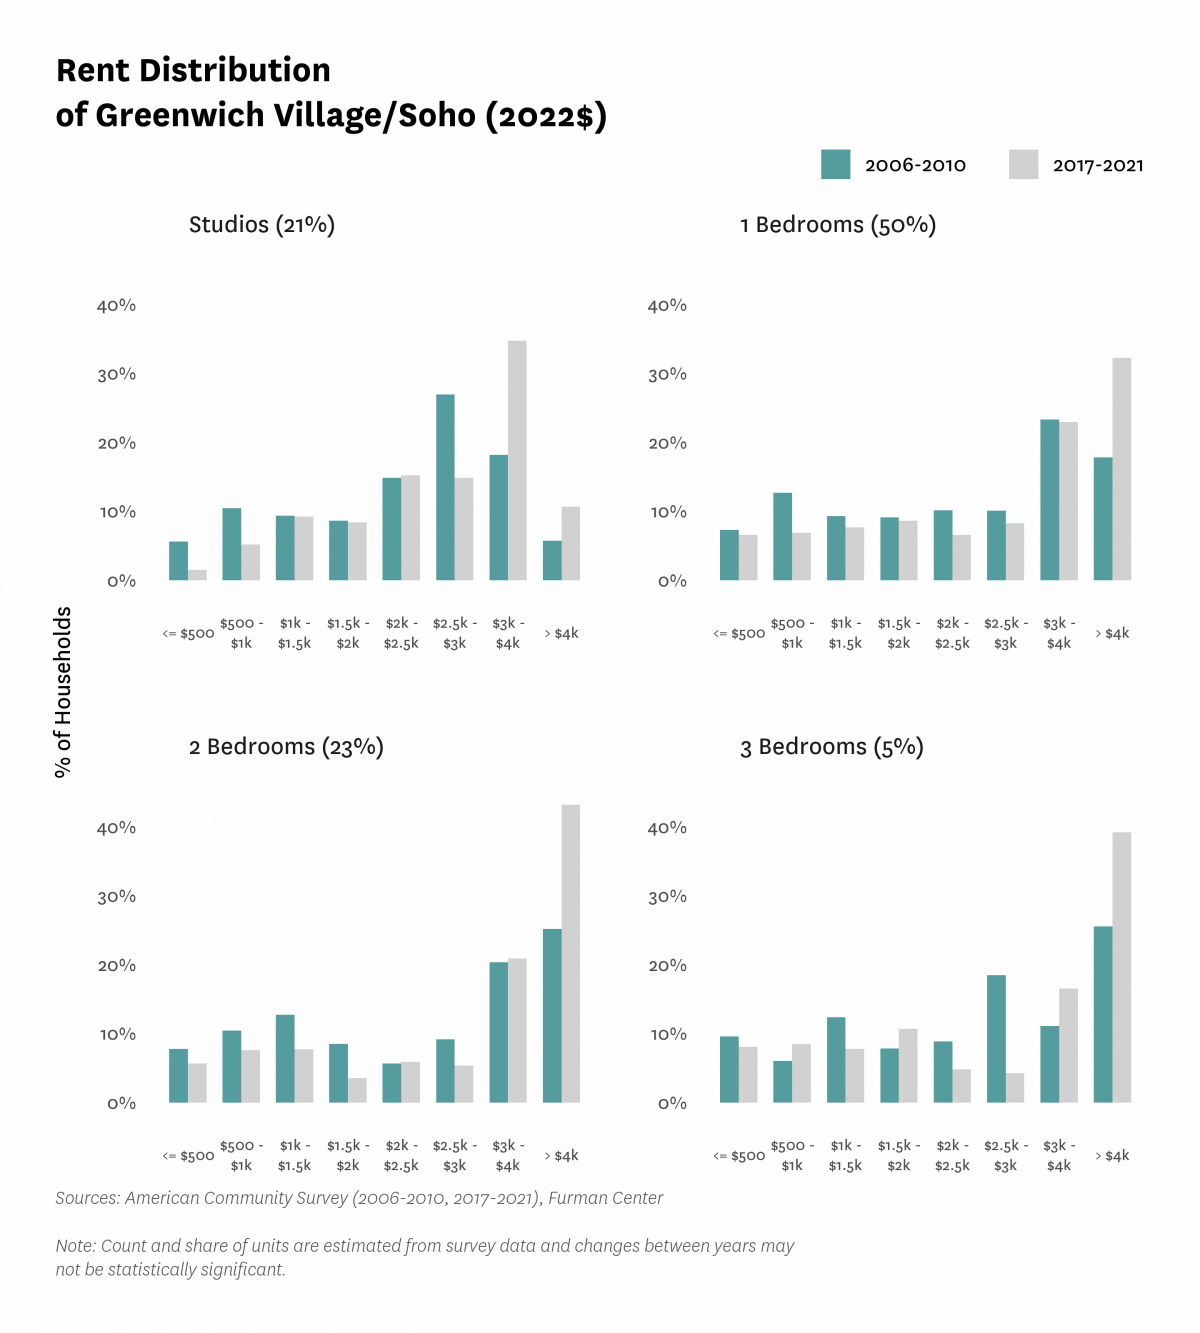 Graph showing the distribution of rents in Greenwich Village/Soho in both 2010 and 2017-2021.